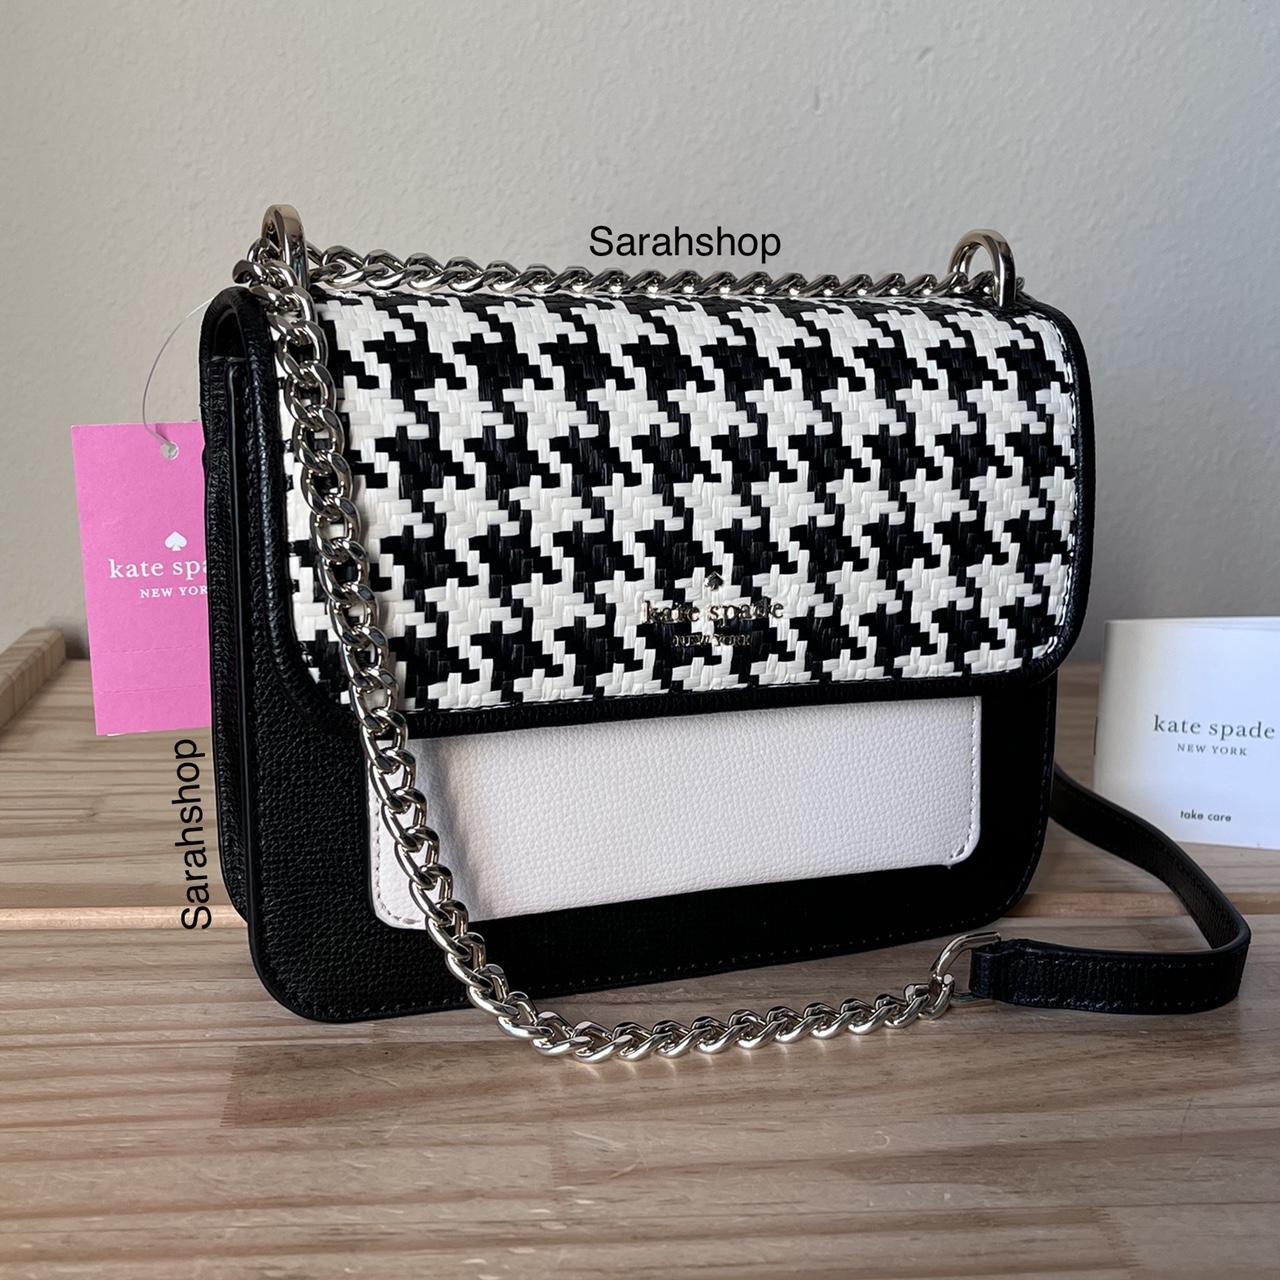 Authentic Kate Spade Black and White Leather Bag with tags